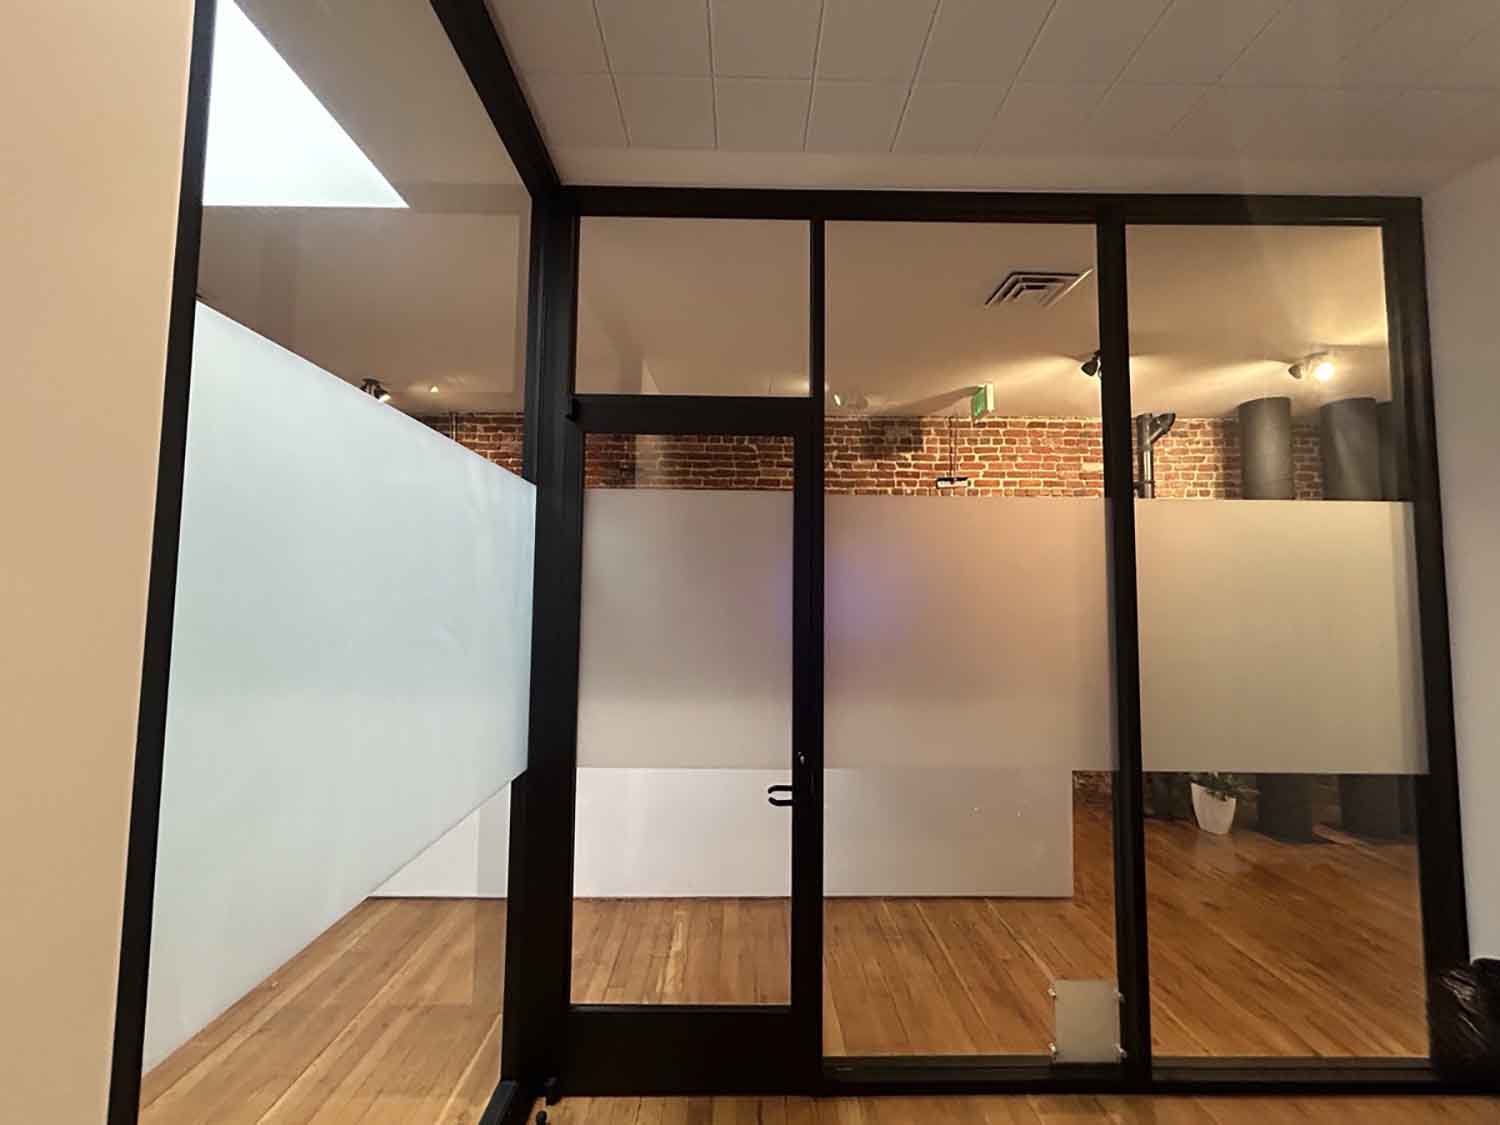 How To Get Frosted Privacy Window Film For Your San Francisco Office. Get a free estimate from ClimatePro.